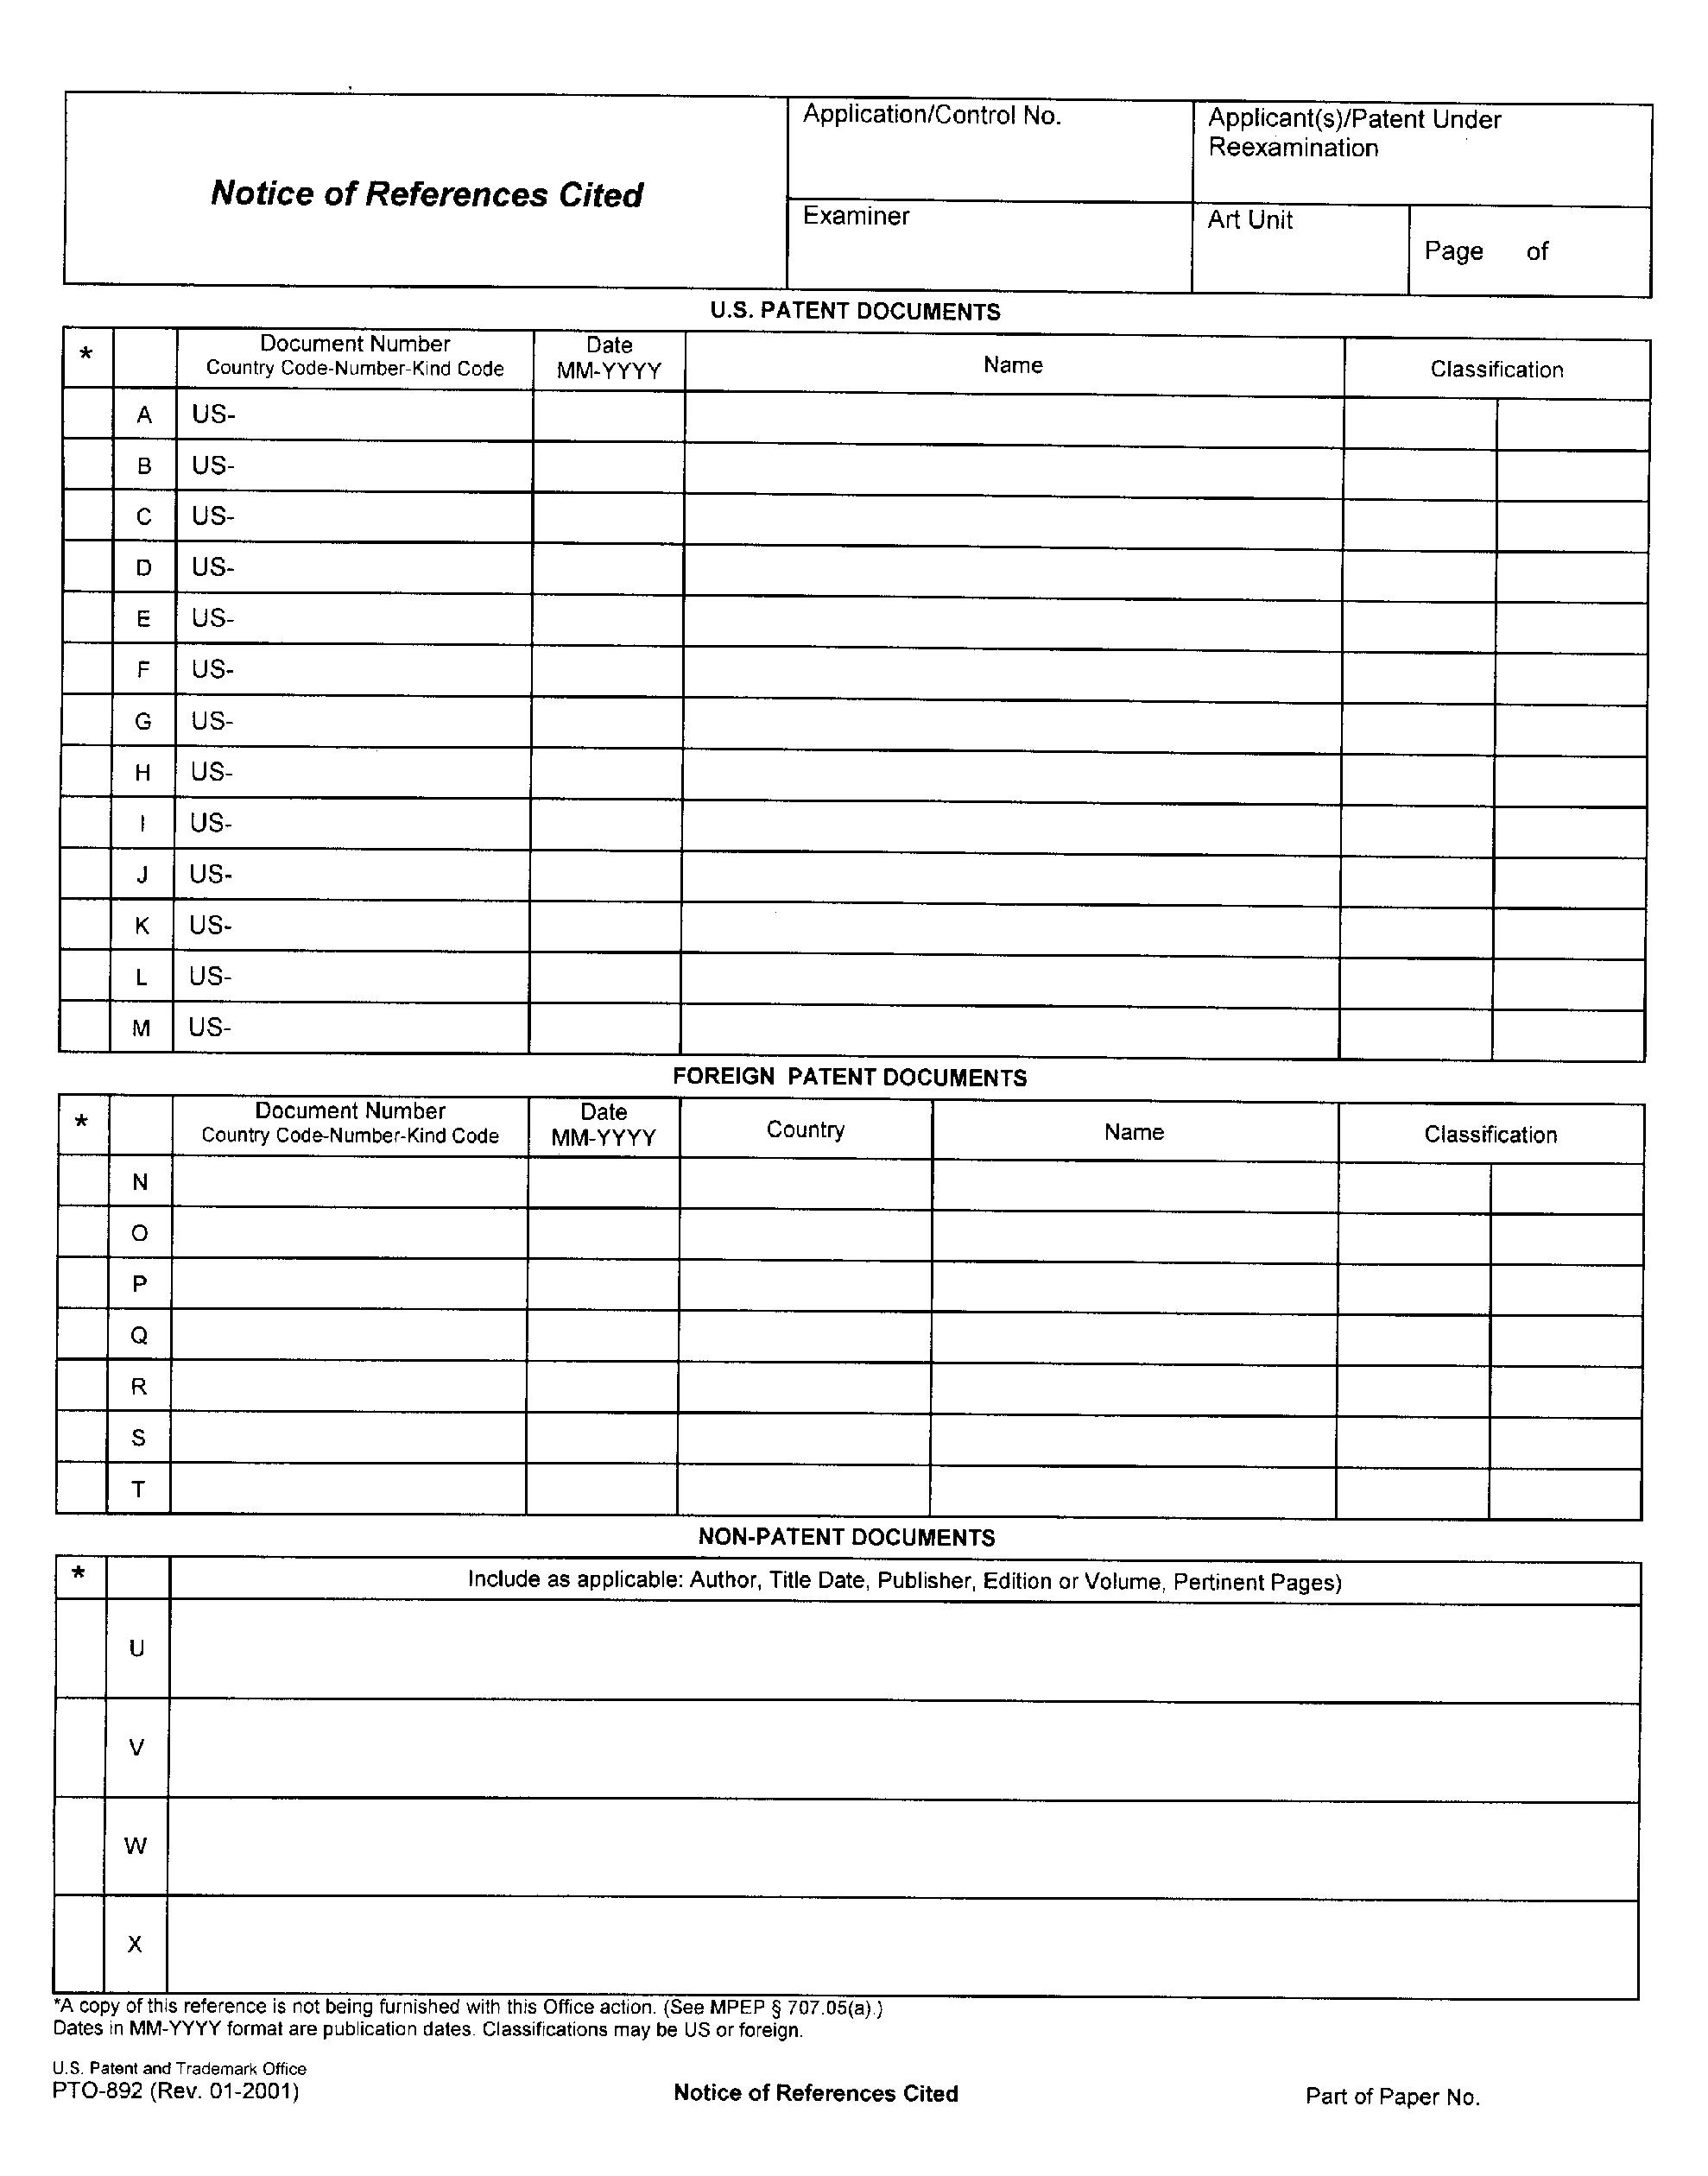 Form PTO-892. Notice of References Cited